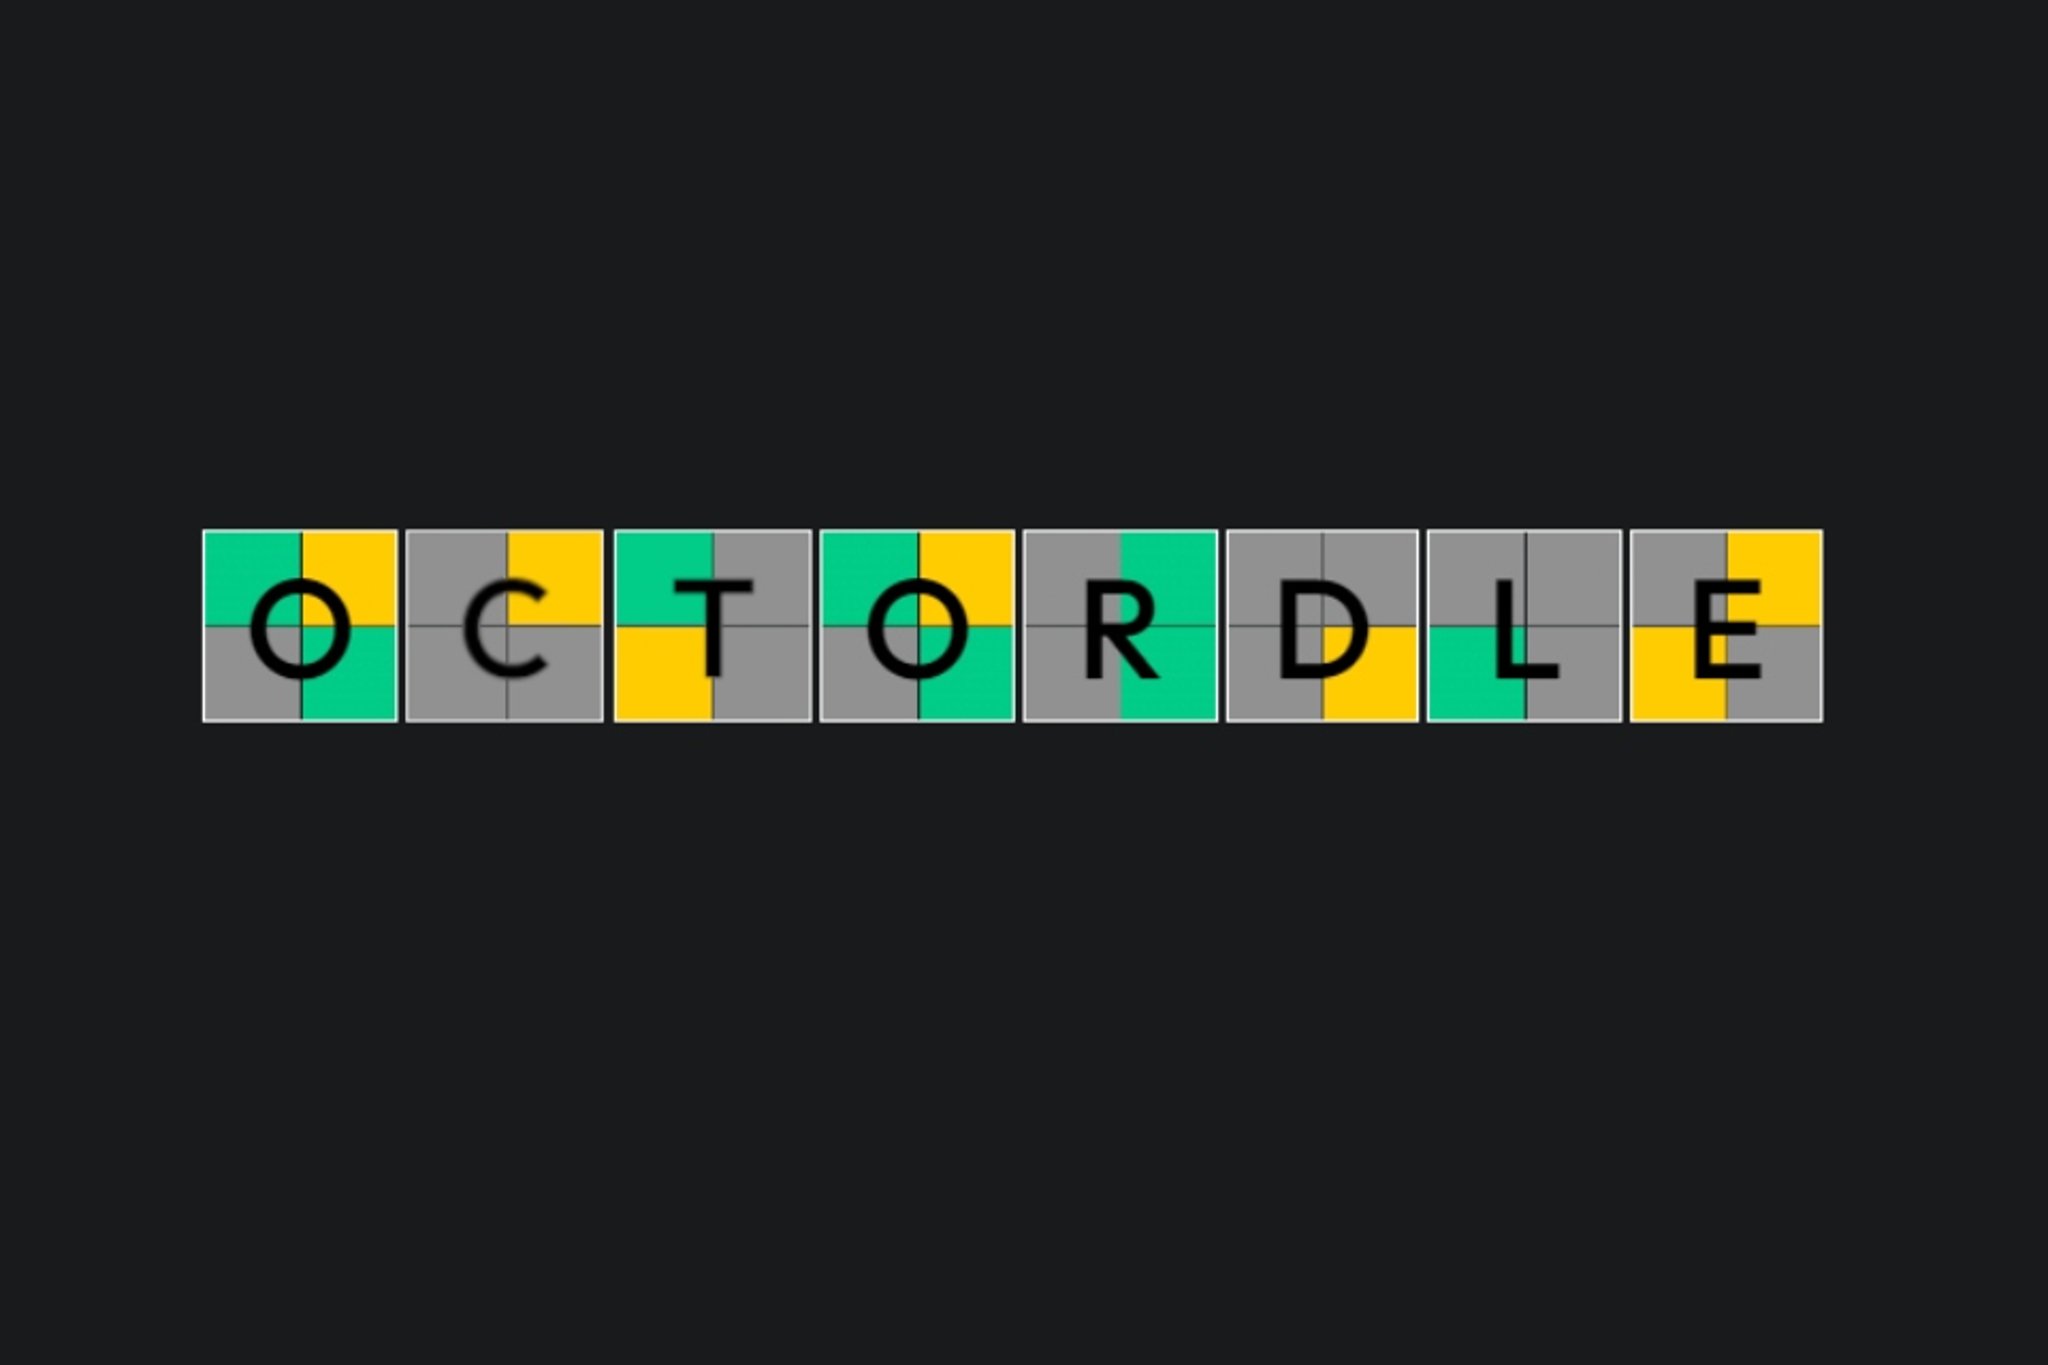 Octordle 255 Answer Today Octordle 254 Answer Today Octordle 253 Answer Today, Hints, Clues And Solution For October 4 2022 Octordle 252 Answer Today Octordle 230 Answer Today, Hints, Clues And Solution For September 11 2022 Octordle 224 Answer Today Octordle 223 Answer Today, Hints, Clues And Solution For September 4 2022. Octordle 222 Answer Today Octordle 221 Answer Today Octordle 217 Answer Today Octordle 214 Answer Today, Hints, Clues And Solution For August 26 2022. Octordle 214 Answer Today Octordle 212 Answer Today Octordle 211 Answer Today, Hints, Clues And Solution For August 23 2022 Octordle 210 Answer Today Octordle 209 Answer Today Octordle 206 Answer Today Octordle 205 Answer Today Octordle 204 Answer Today Octordle 203 Answer Today Octordle 202 Answer Today Octordle 201 Answer Today Octordle 200 Answer Today, Hints, Clues And Solution For August 12 2022 Octordle 199 Answer Today, Hints, Clues And Solution For August 11 2022 Octordle 198 Answer Today Octordle 197 Answer Today Octordle 196 Answer Today Octordle 195 Answer Today Octordle 194 Answer Today Octordle 193 Answer Today, Hints, Clues And Solution For August 5 2022 Octordle 192 Answer Today Octordle 191 Answer Today Octordle 190 Answer Today Octordle 189 Answer Today Octordle 186 Answer Today Octordle 185 Answer Today Octordle 183 Answer Today Octordle 182 Answer Today Octordle 181 Octordle 180 Answer Today Octordle 179 Answer TodayOctordle 184 Answer TodayOctordle 178 Answer TodayOctordle 177 Answer Today Octordle 176 Answer Today, Hints, Clues And Solution For July 19 2022Octordle 175 Answer Today, Hints, Clues And Solution For July 18 2022Octordle 171 Answer TodayOctordle 170 Answer Today, Hints, Clues And Solution For July 13 2022 Octordle 169 Answer TodayOctordle 168 Answer Today, Hints, Clues And Solution For July 11 2022 Octordle 167 Answer TodayOctordle 166 Answer Today, Hints, Clues And Solution For July 9 2022 Octordle 163 Answer Today, Hints, Clues And Solution For July 6 2022